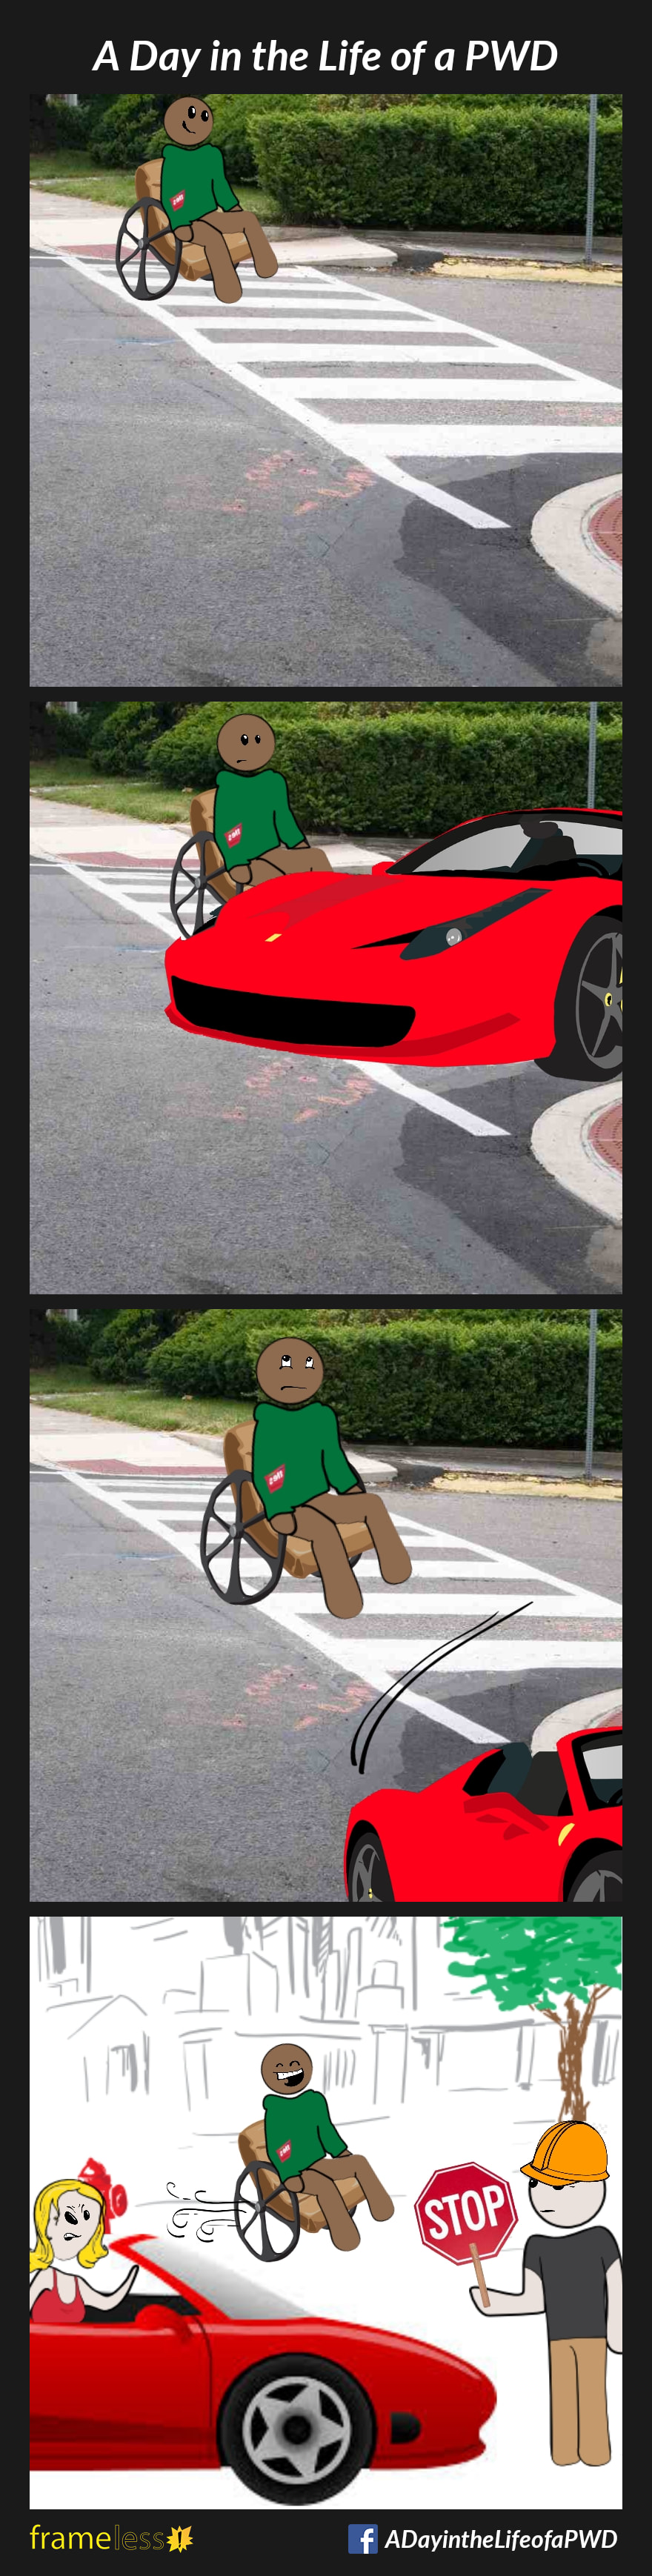 COMIC STRIP 
A Day in the Life of a PWD 

Frame 1:
A man in a wheelchair is crossing the road in a crosswalk.

Frame 2:
Before the man can reach the other side, a turning car blocks the curb cut.

Frame 3:
The man rolls his eyes as he waits for the car to turn.

Frame 4:
Further down the road, the man passes the car that blocked his path. It has been stopped by a flagger for construction, and the driver is irritated. 
The man wheels by, laughing.